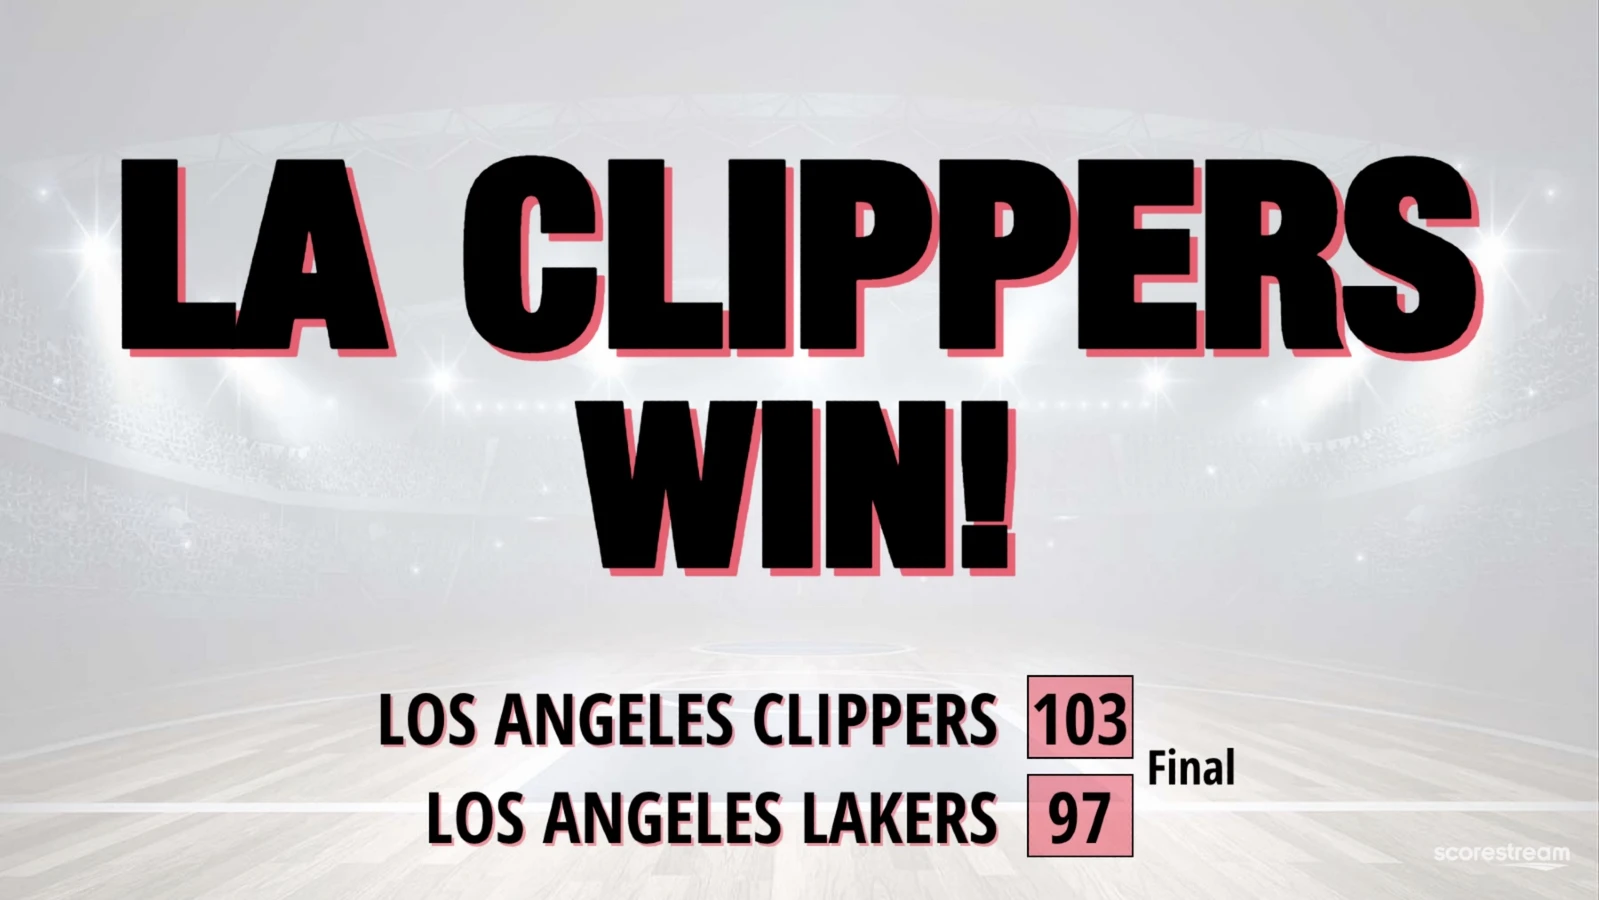 The Los Angeles Clippers beat the Los Angeles Lakers 103-97